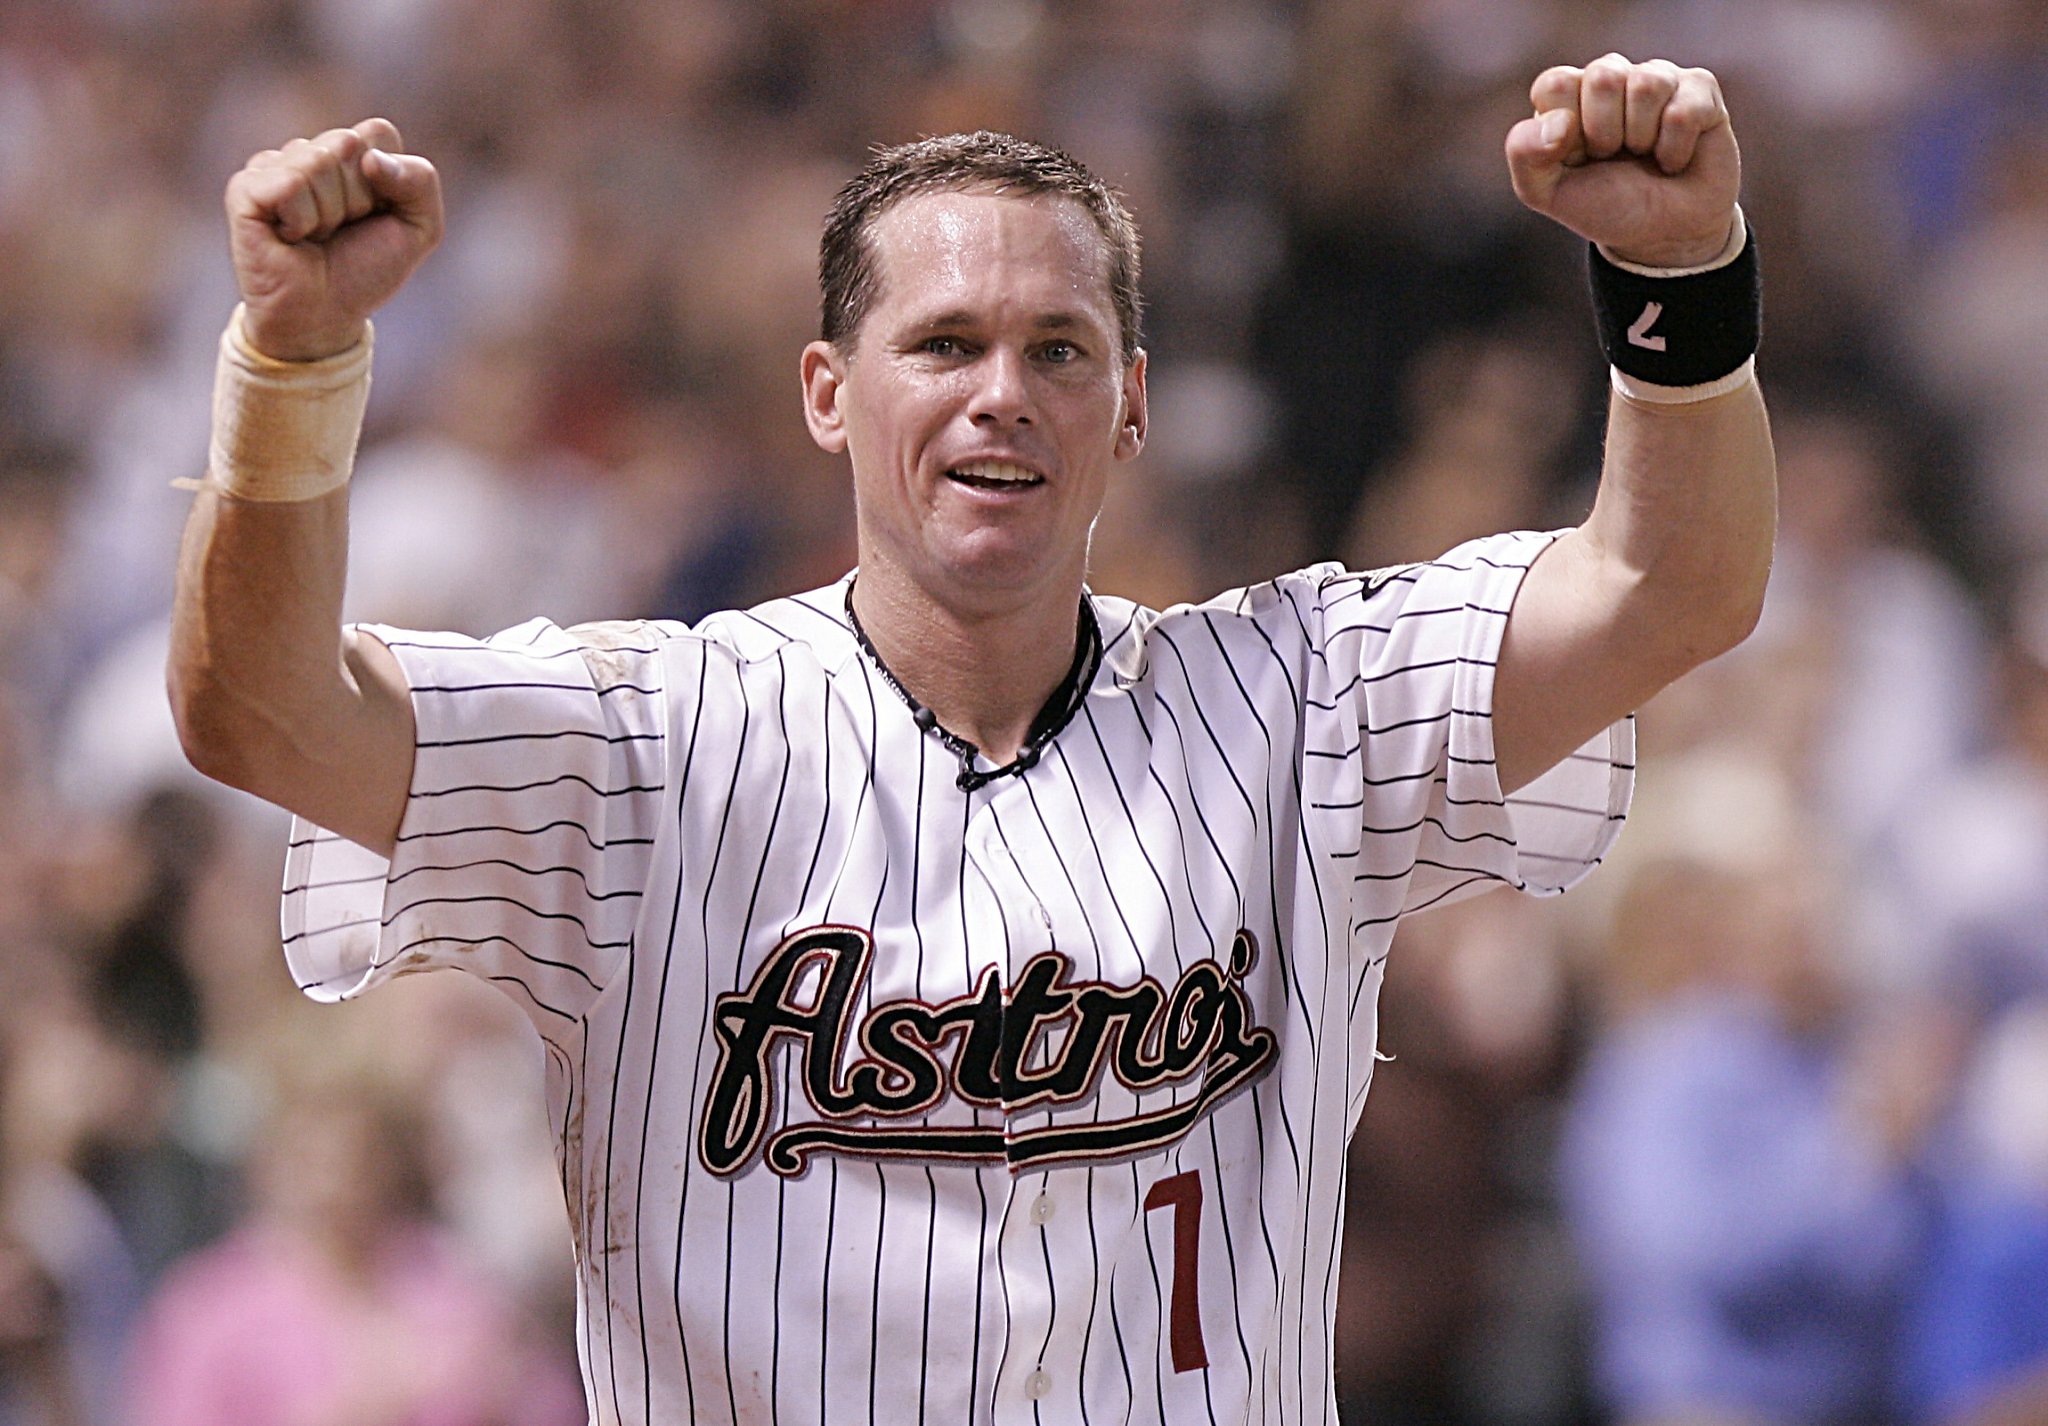 Could Craig Biggio have made Hall of Fame as Cardinal?